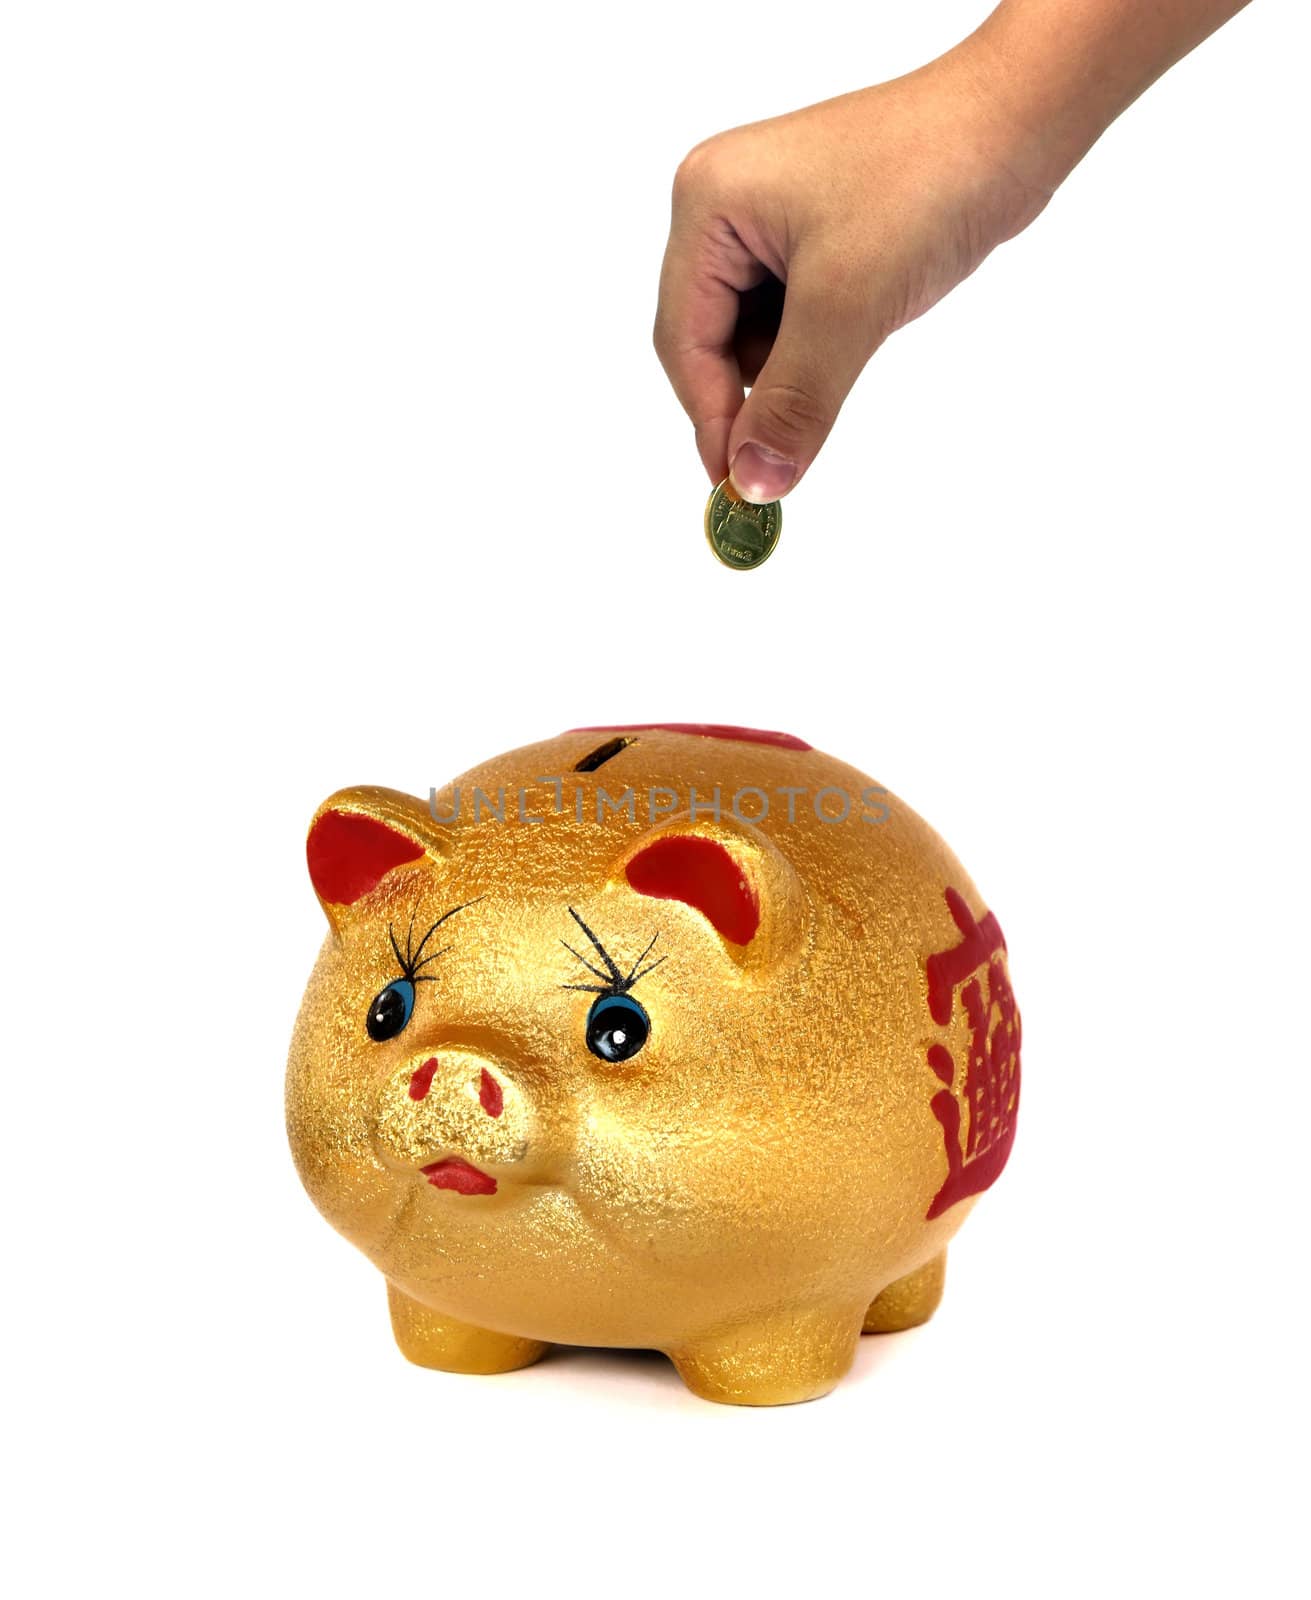 The Golden Pig piggy bank on white background.